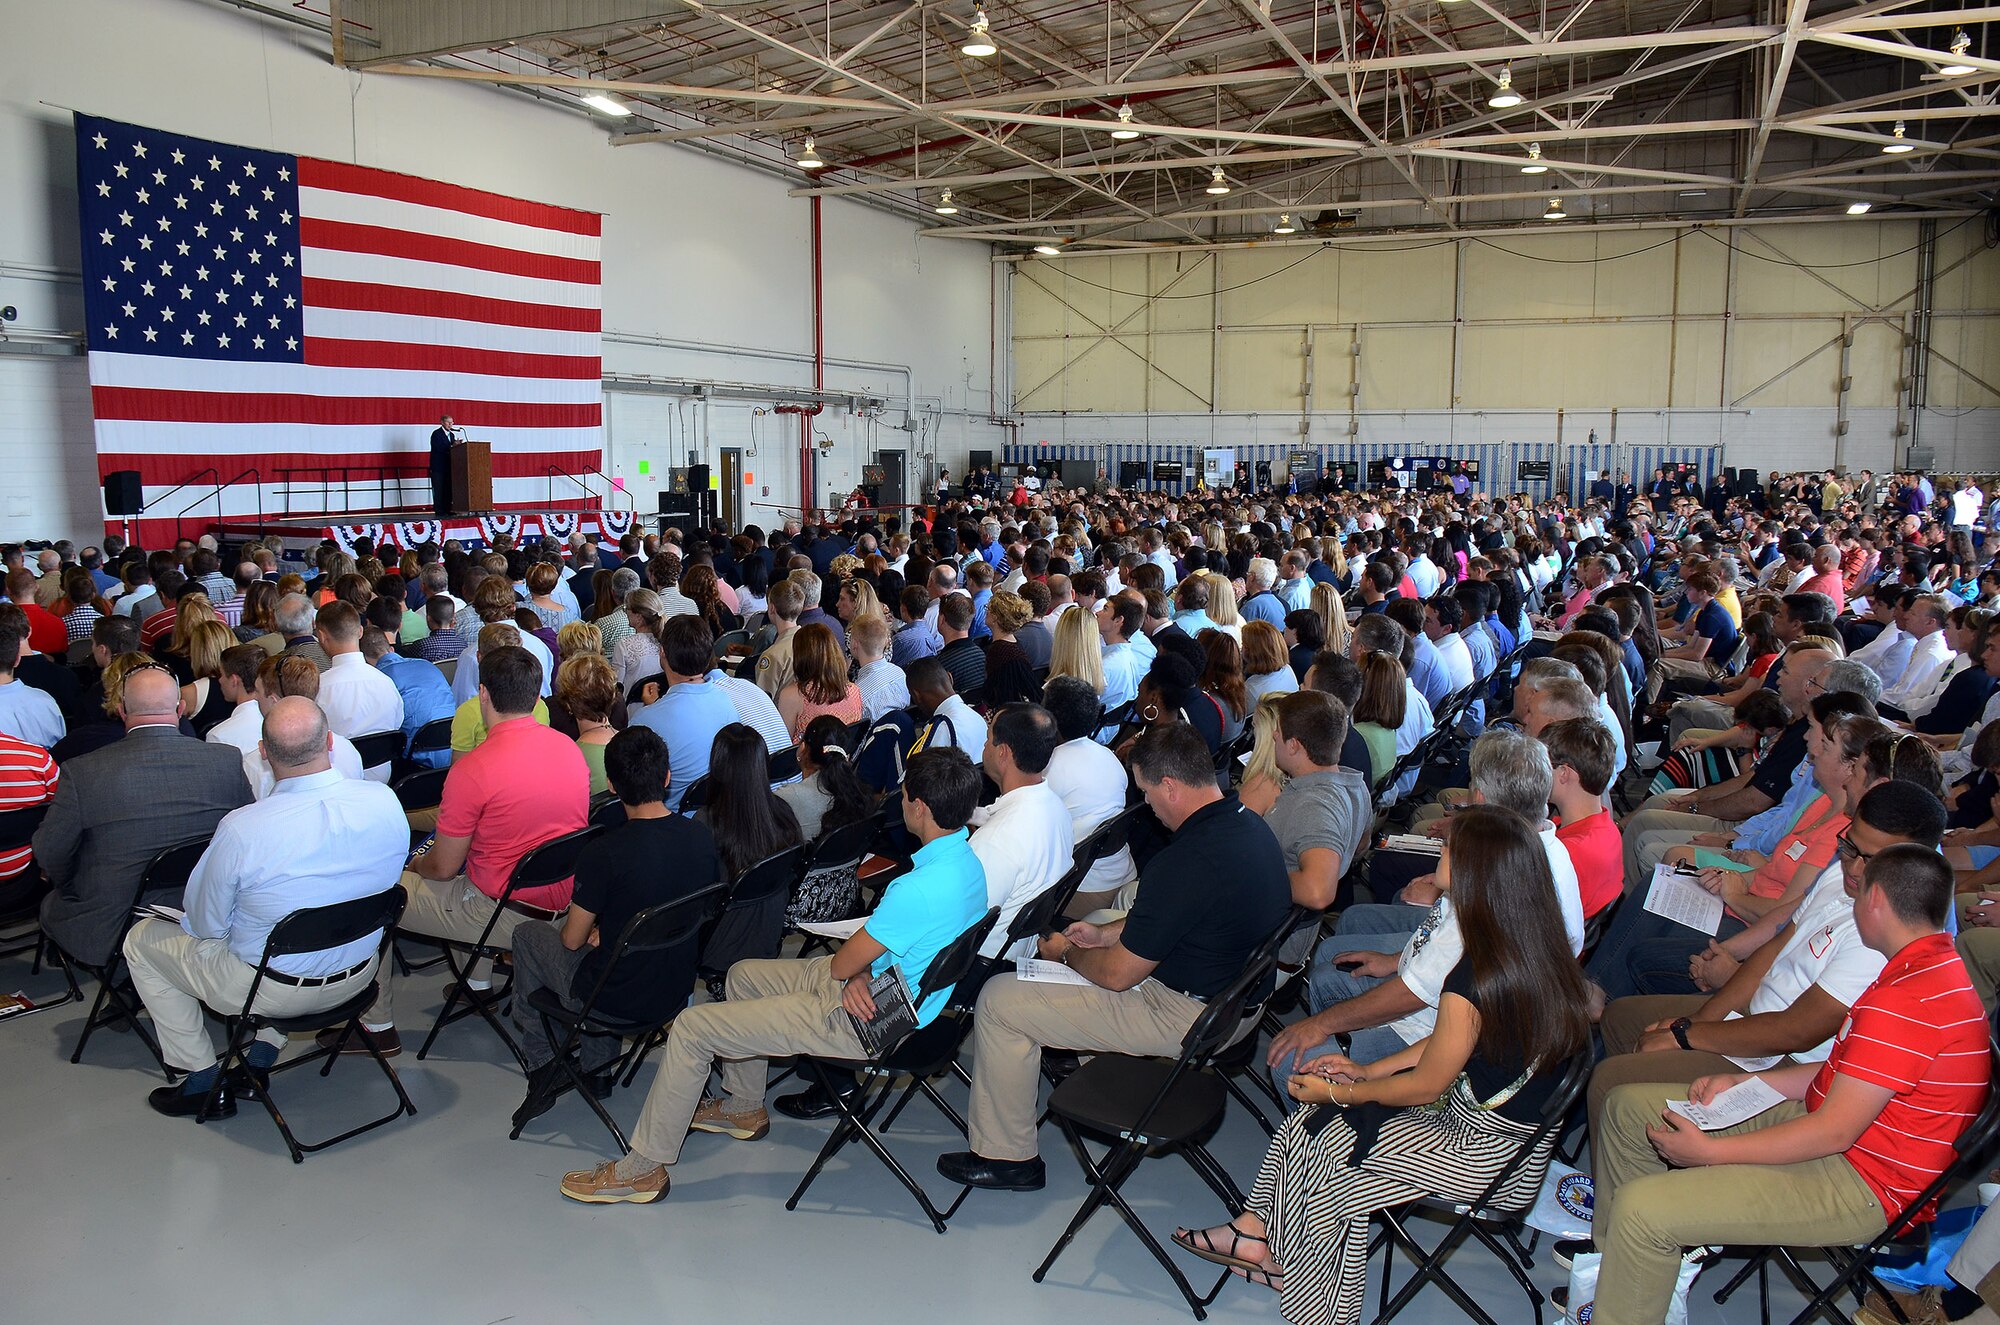 Over 1,200 people were in attendance for the 2015 Georgia Congressional Delegation Academy Day held at Dobbins Air Reserve Base, Ga., May 9, 2015. The annual event provides high school students the opportunity to meet with representatives from each of the service academies, including West Point, the U.S. Naval Academy, the U.S. Air Force Academy, the Coast Guard Academy, and the U.S. Merchant Marines Academy. (U.S. Air Force photo/ Brad Fallin)